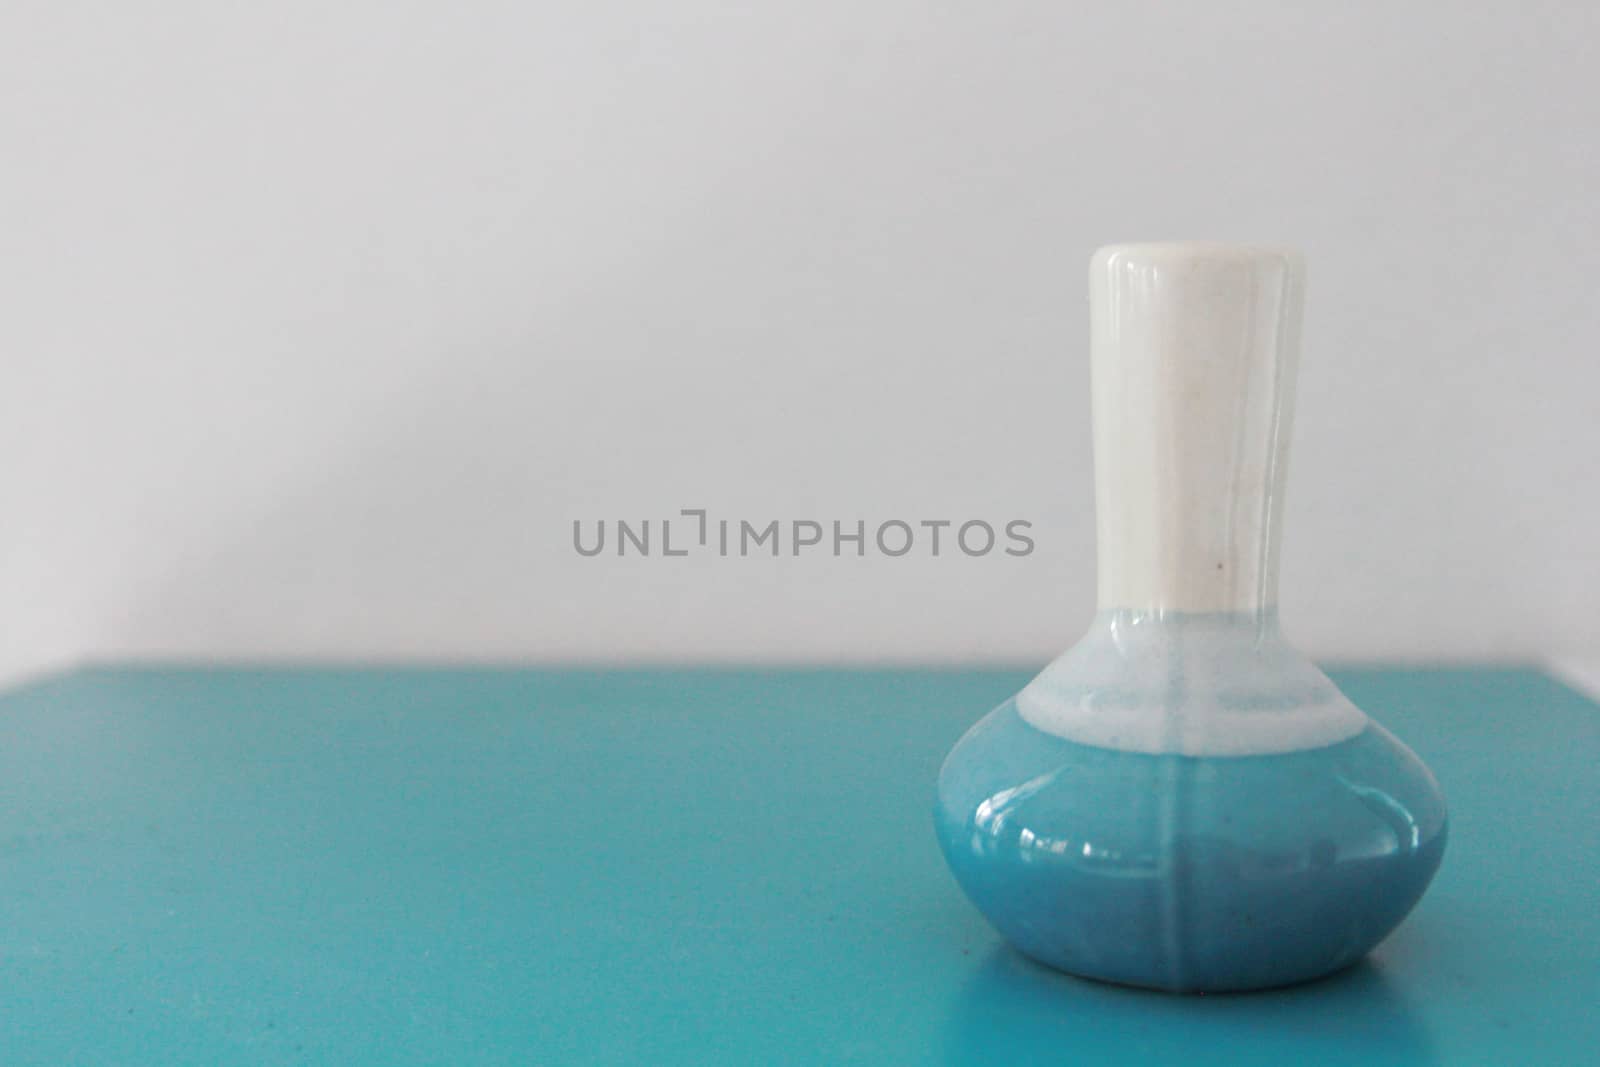 This is a white and blue ceramic vase on the table.